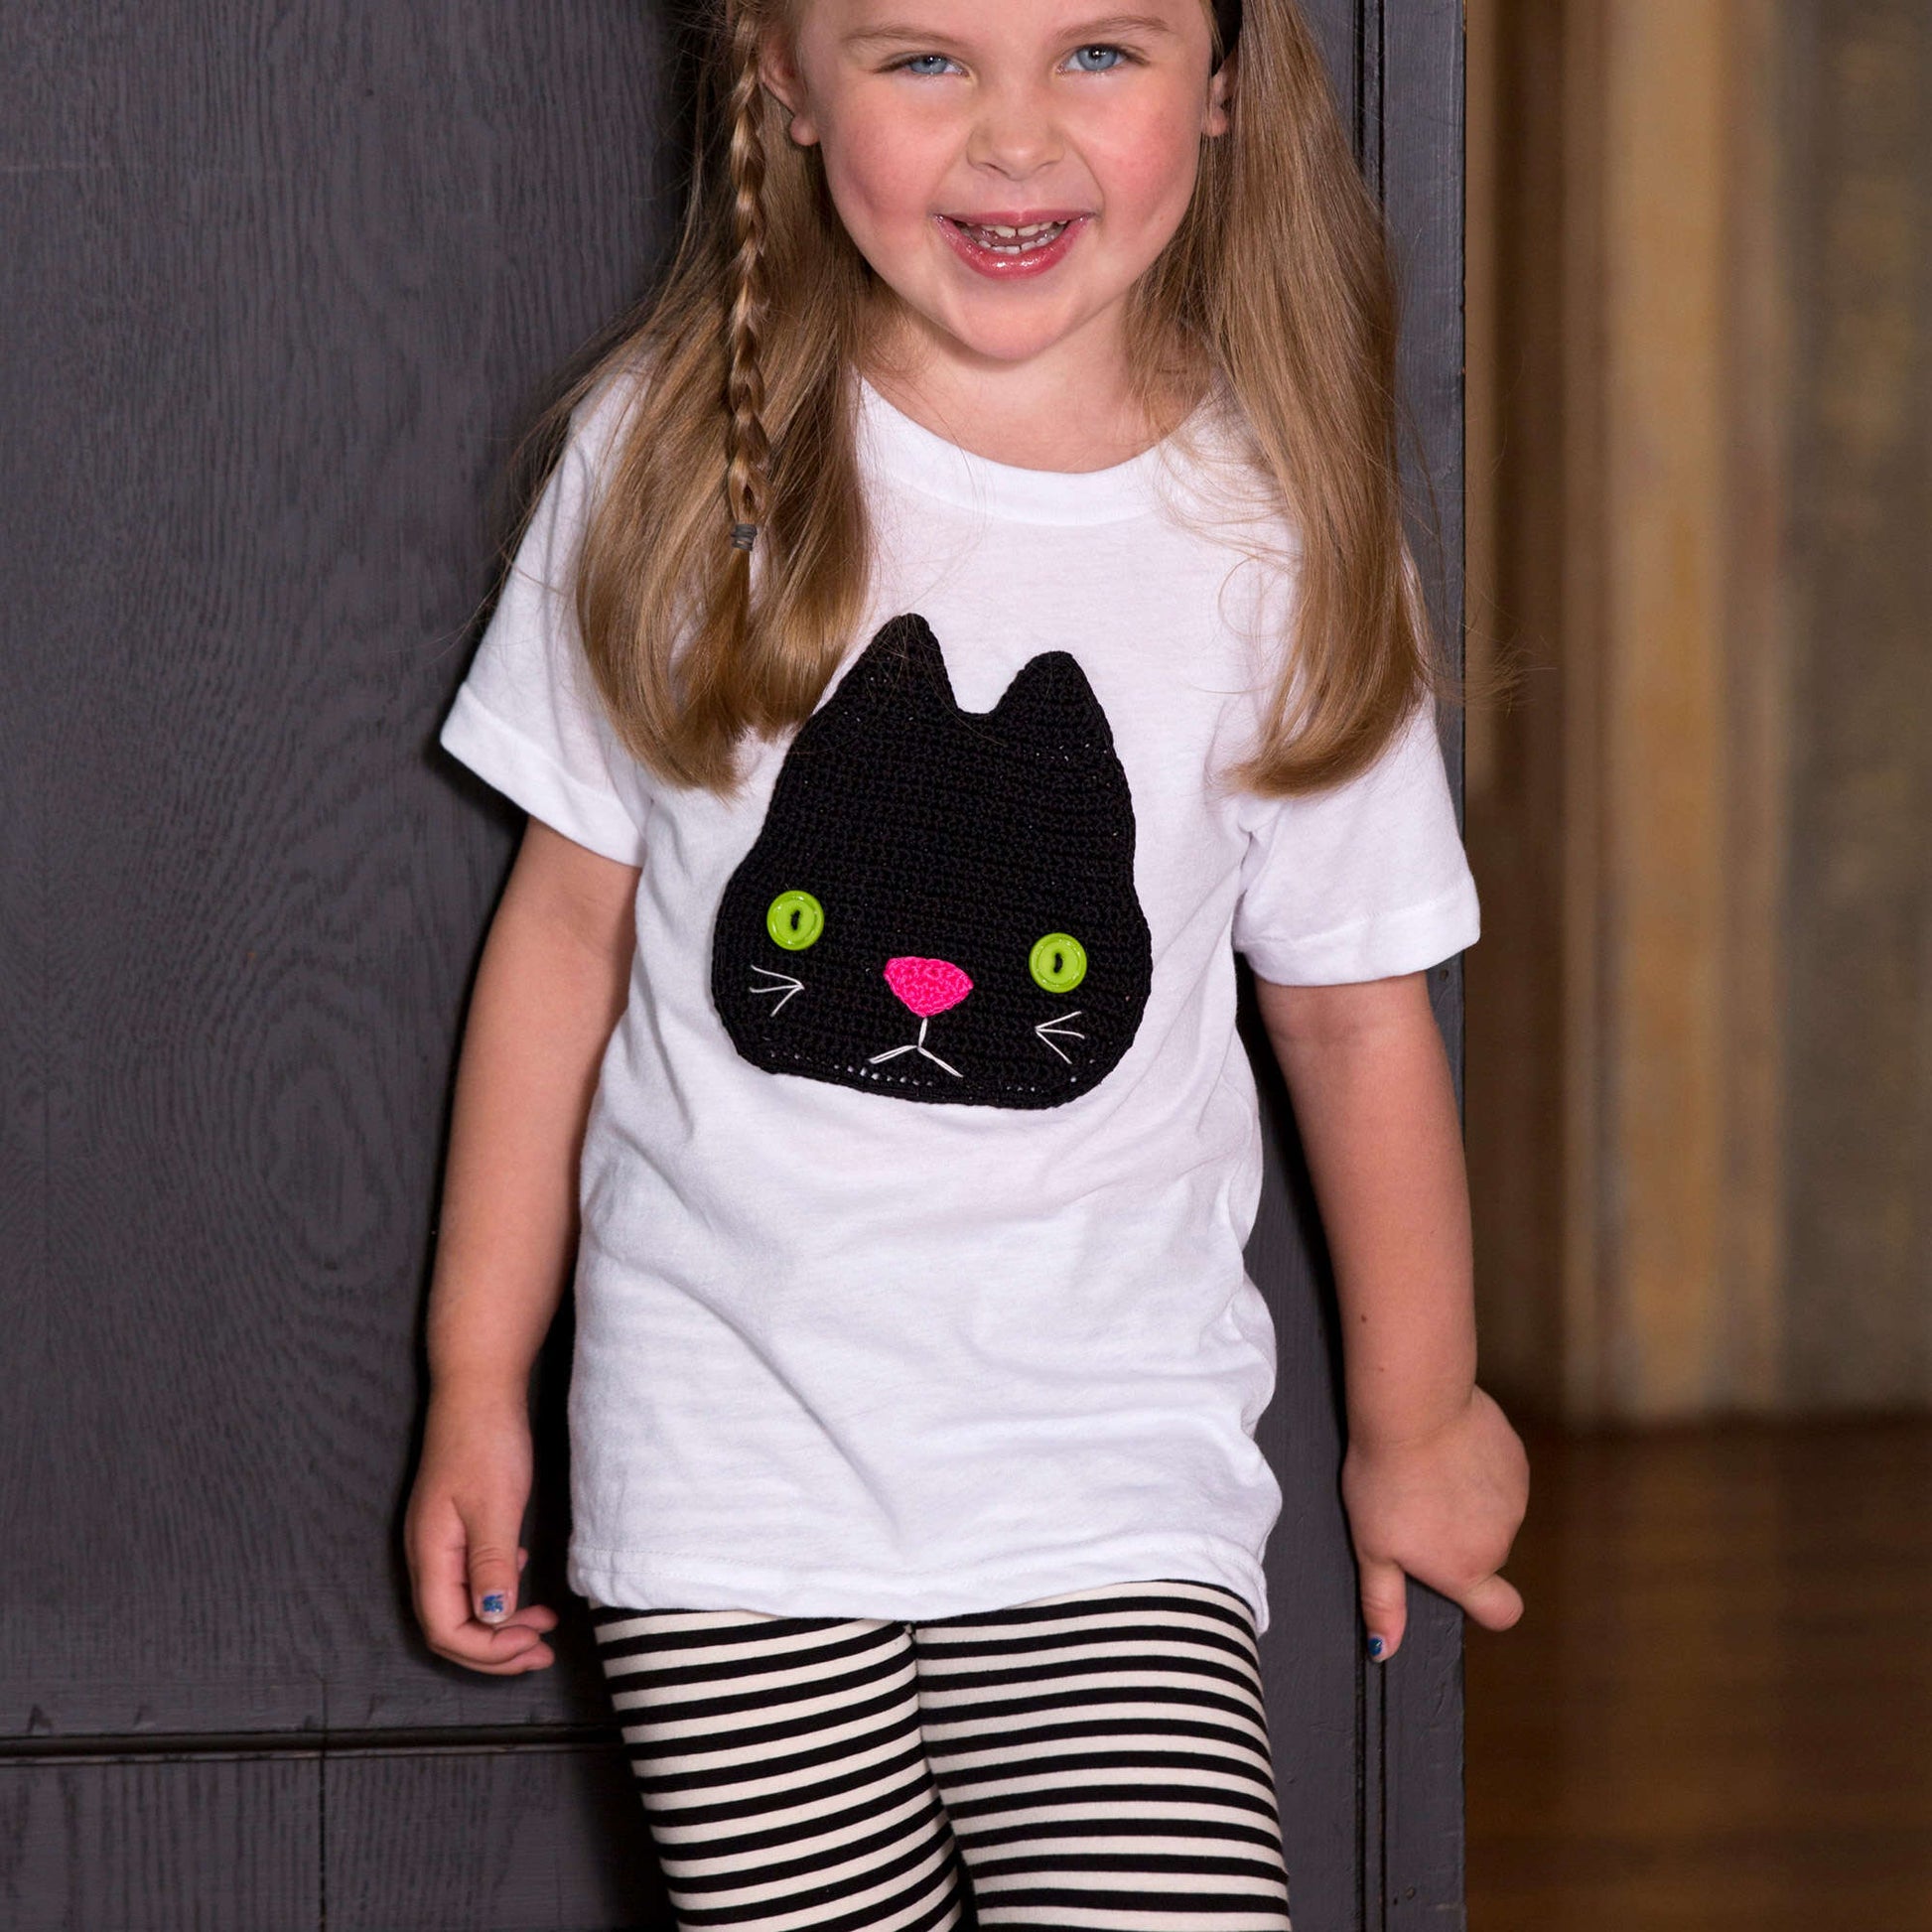 Free Aunt Lydia's Boo Kitty Appliqué Pattern